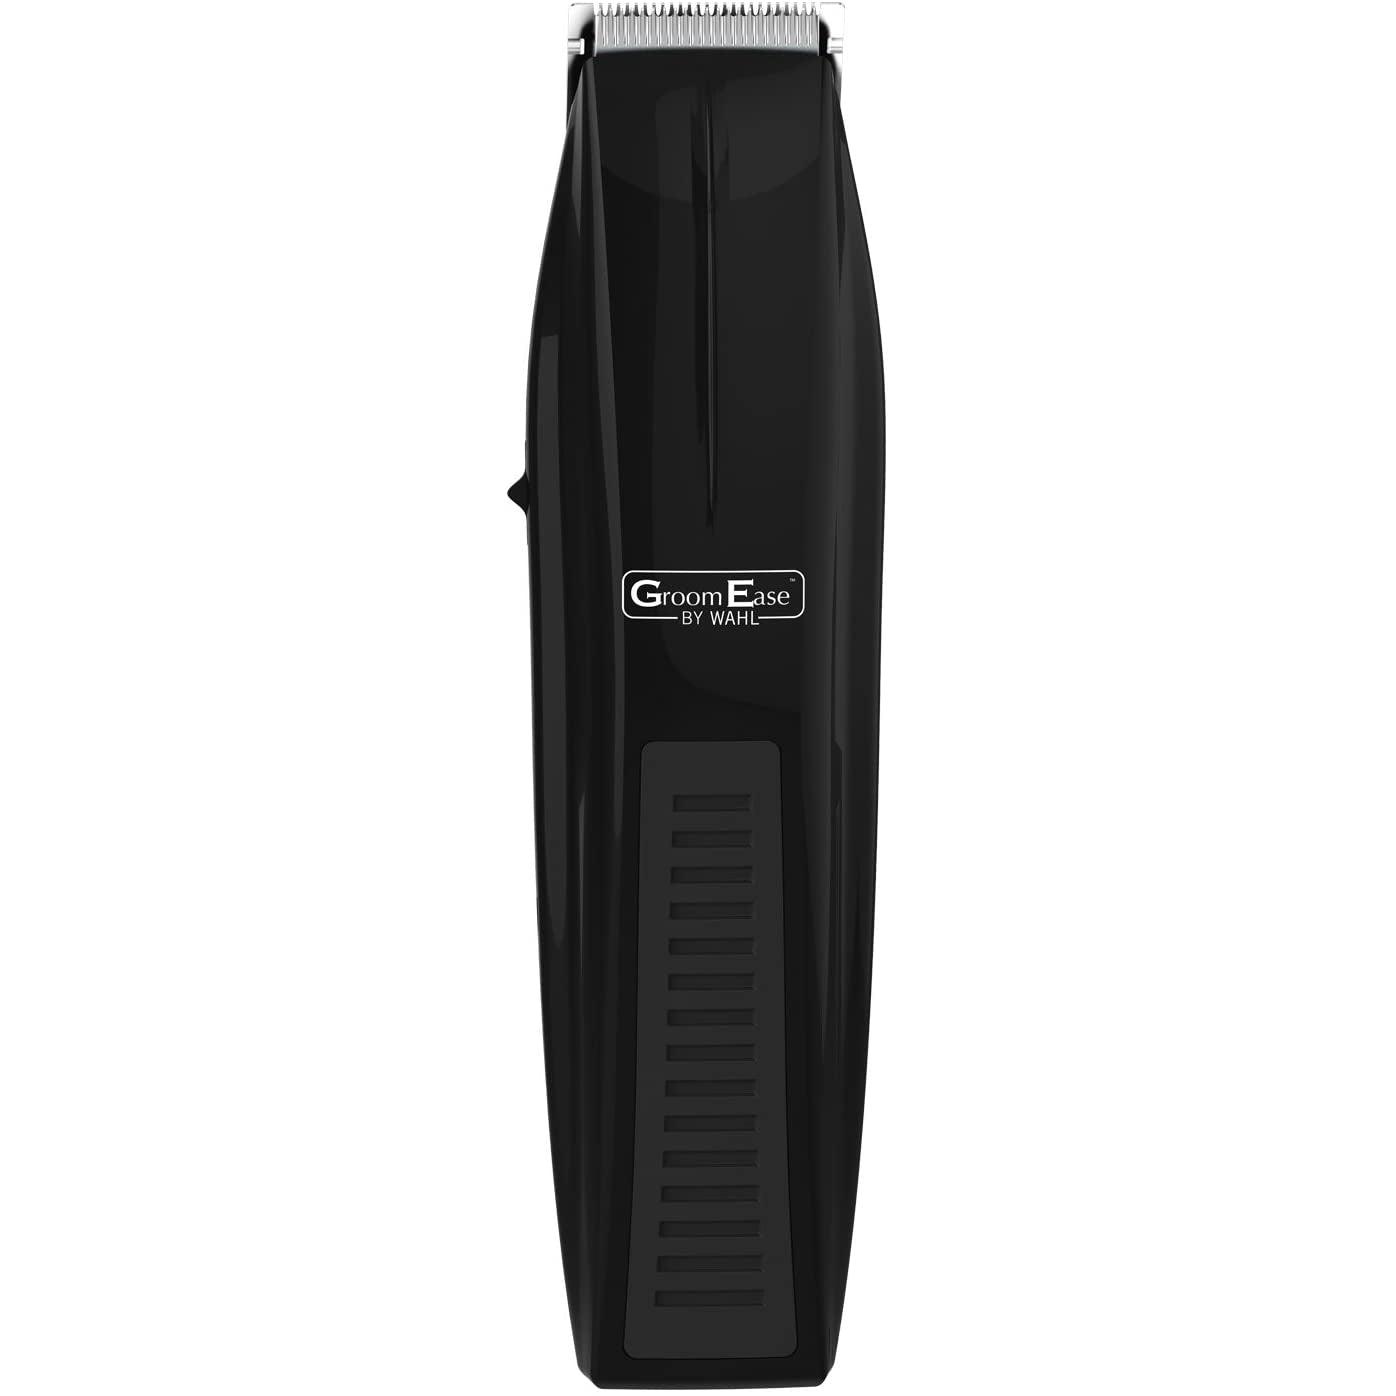 GroomEase by Wahl Performer Trimmer - Healthxpress.ie